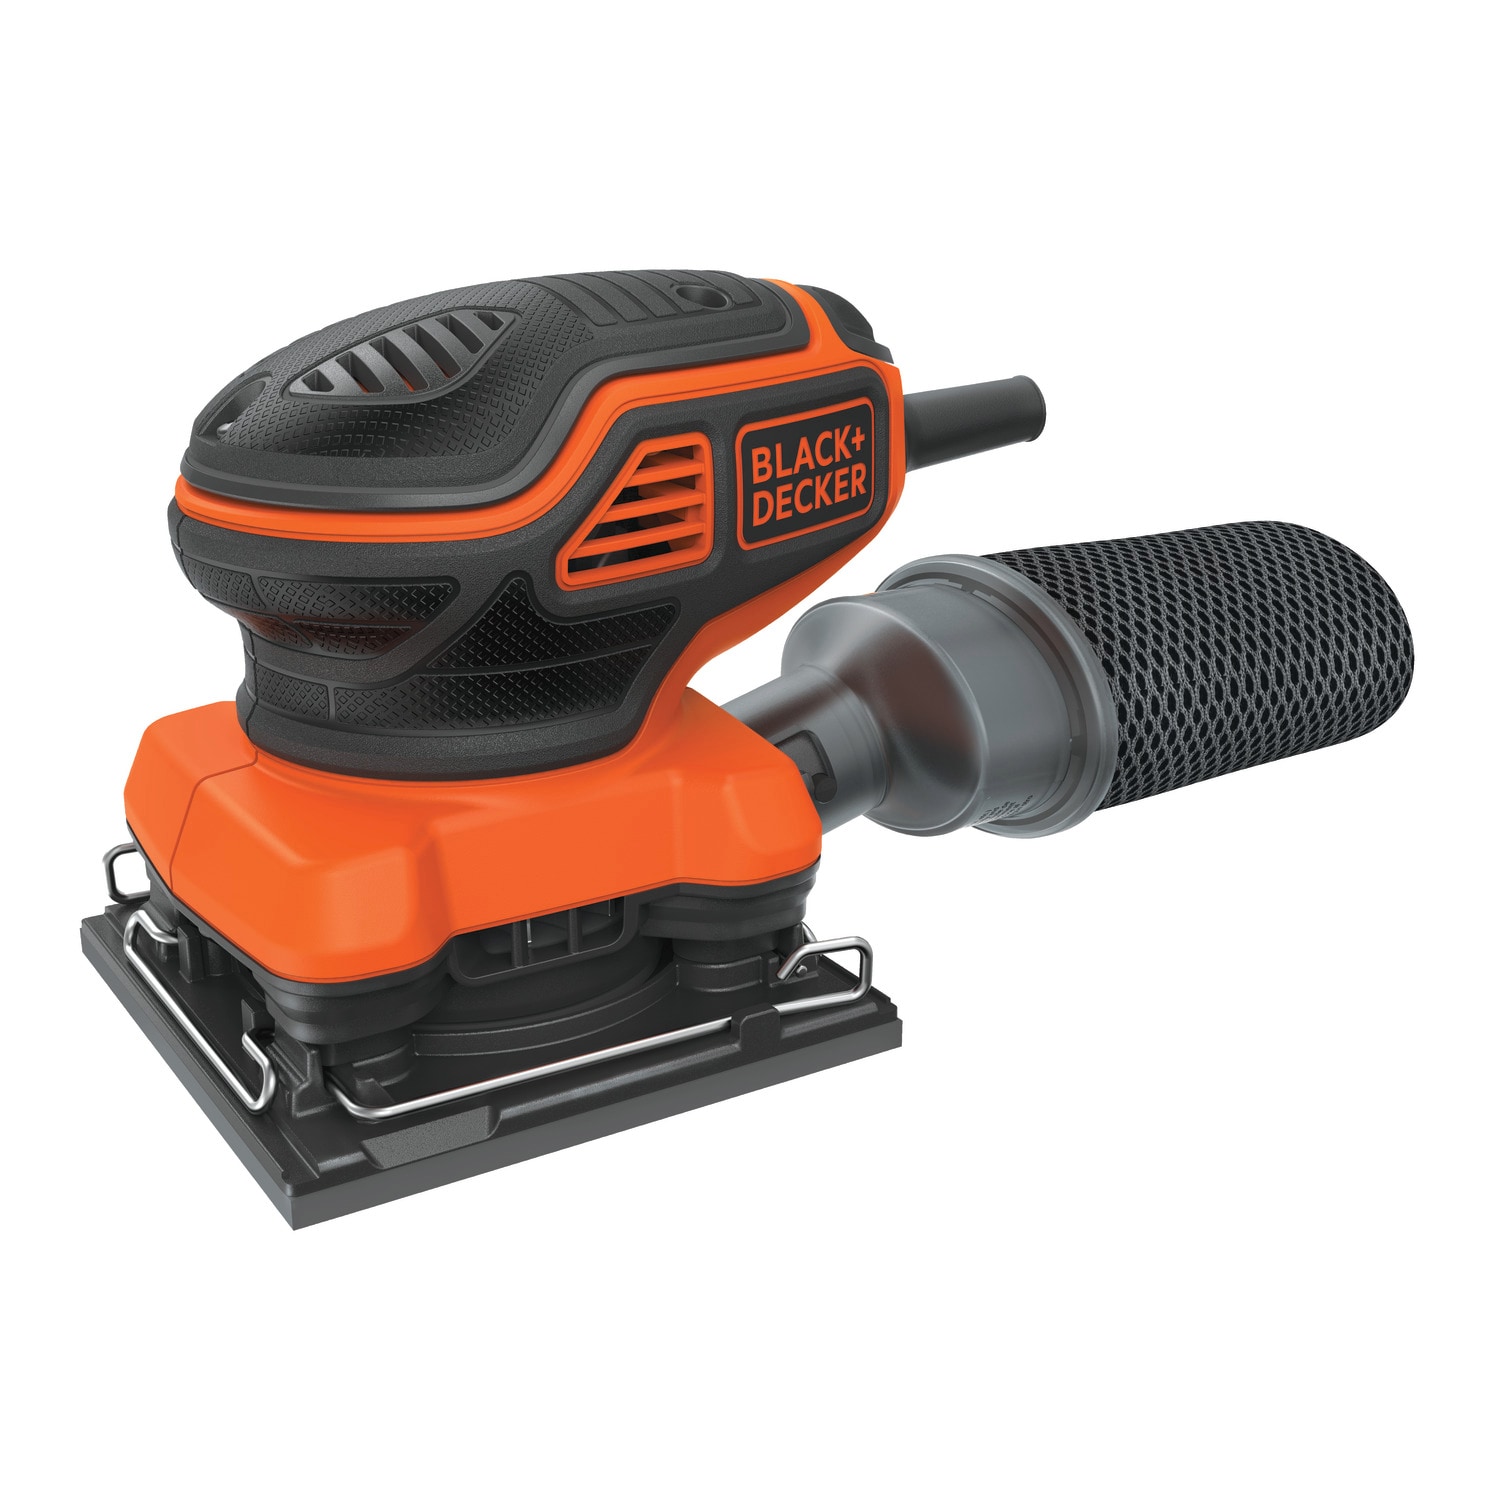 BLACK+DECKER 2-Amp Corded Variable Sheet Sander with Management the Power Sanders department at Lowes.com